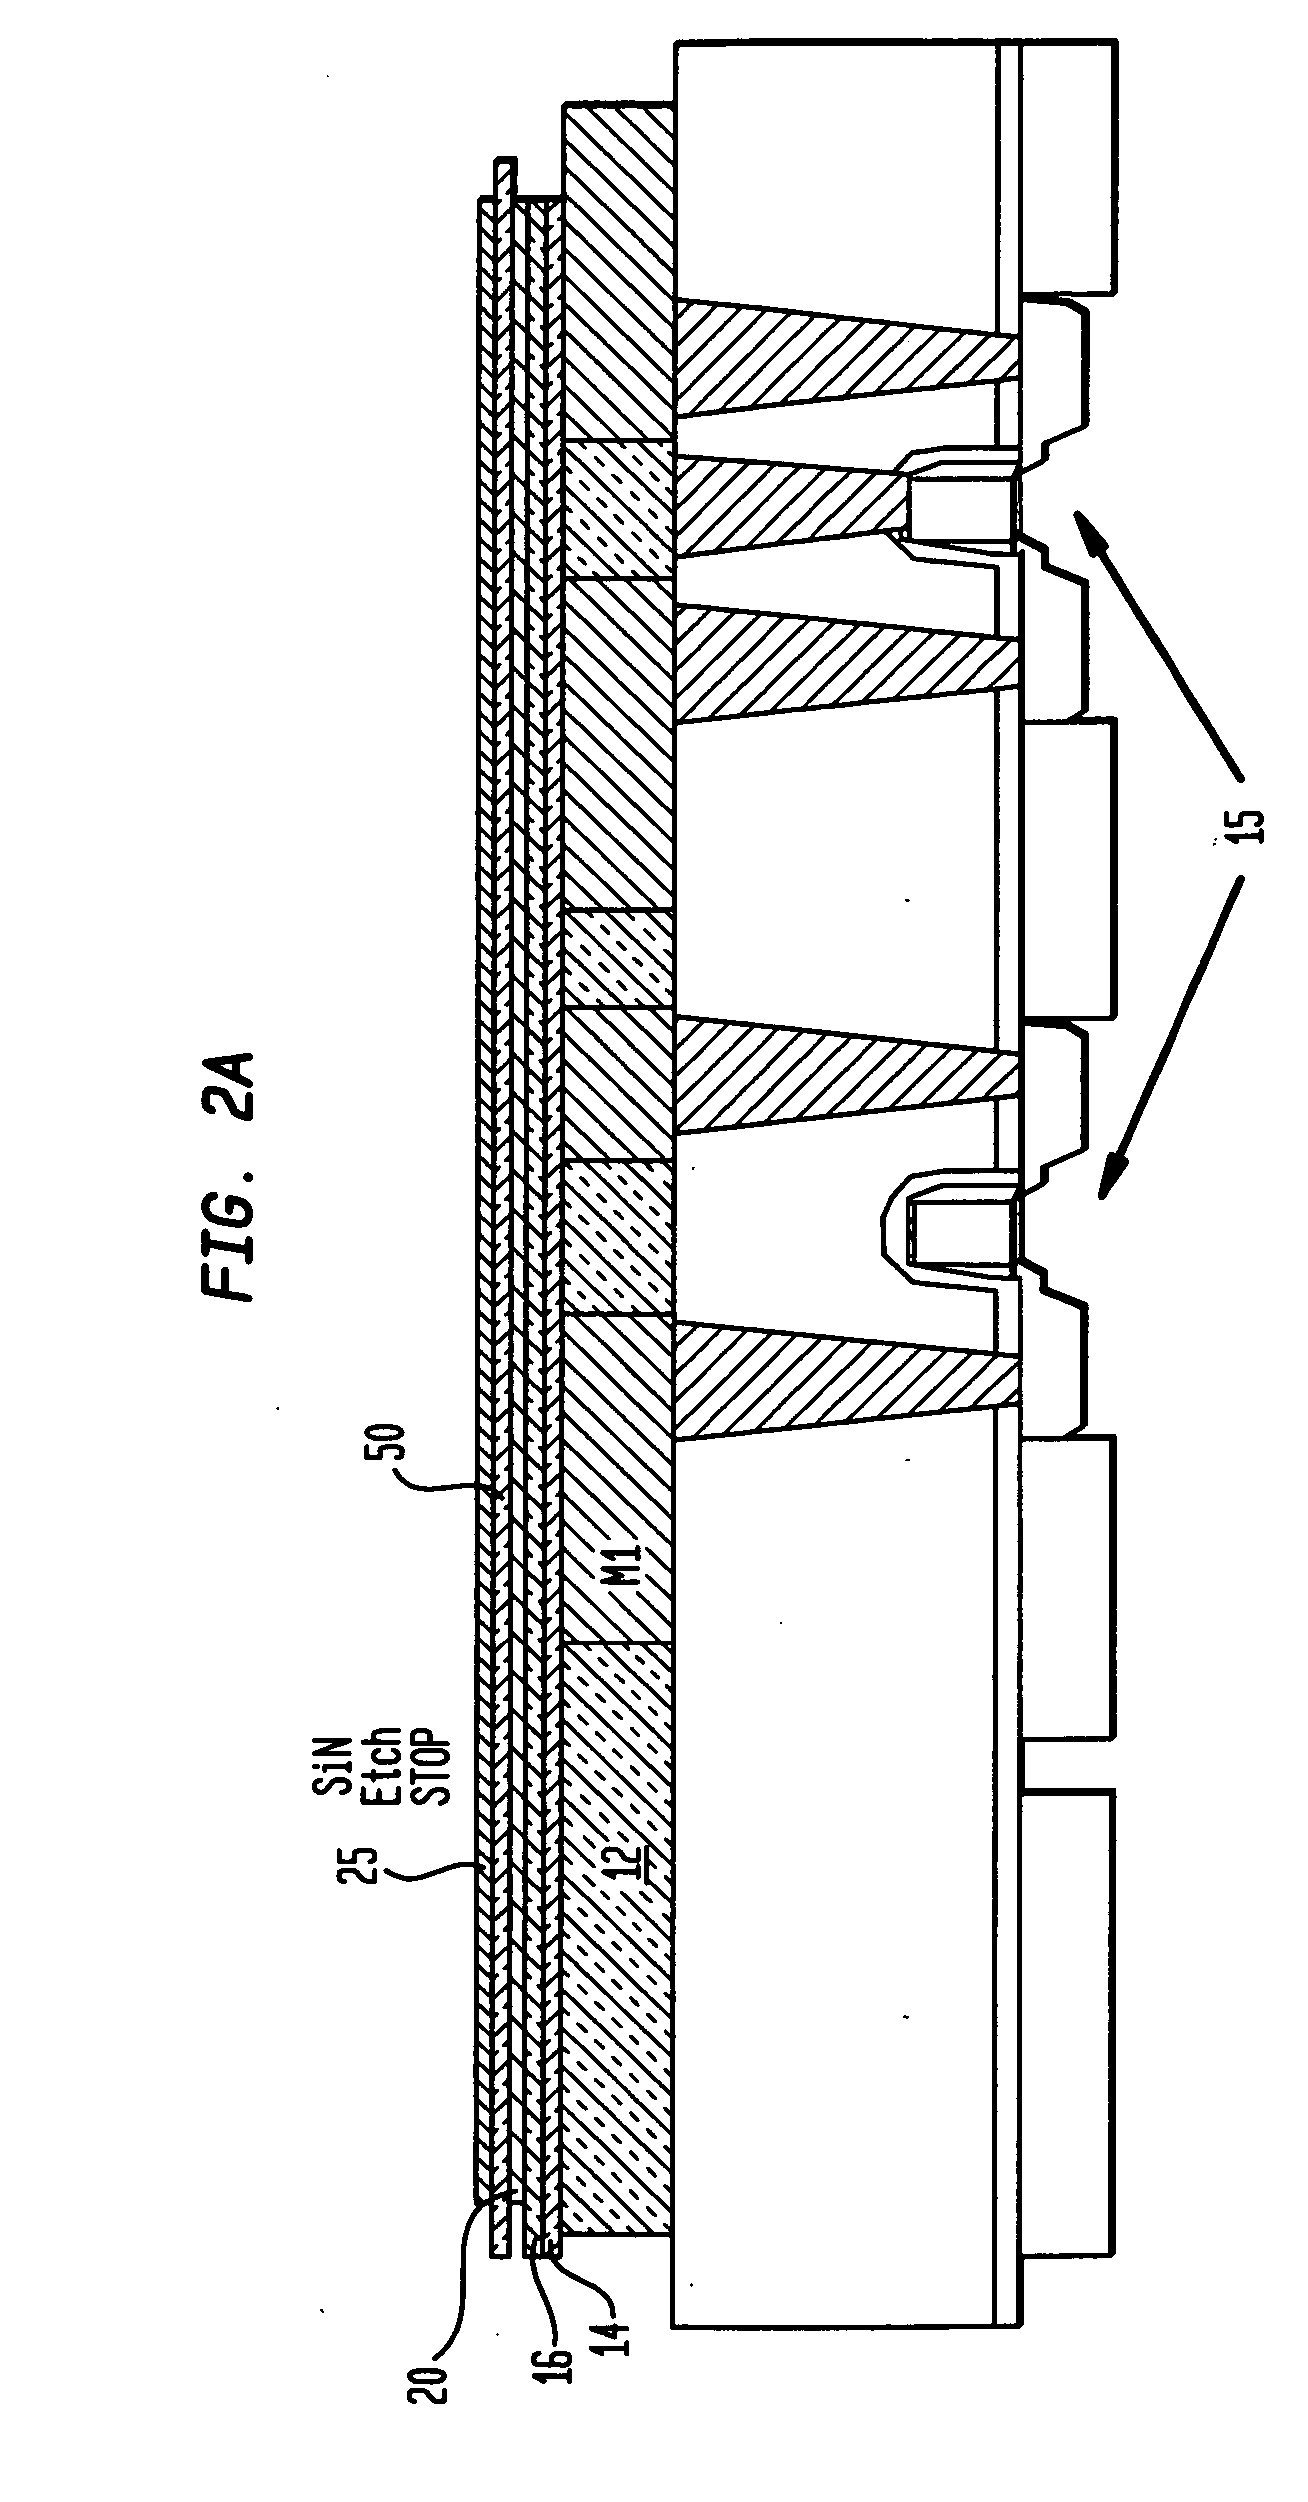 Thin film resistor with current density enhancing layer (CDEL)